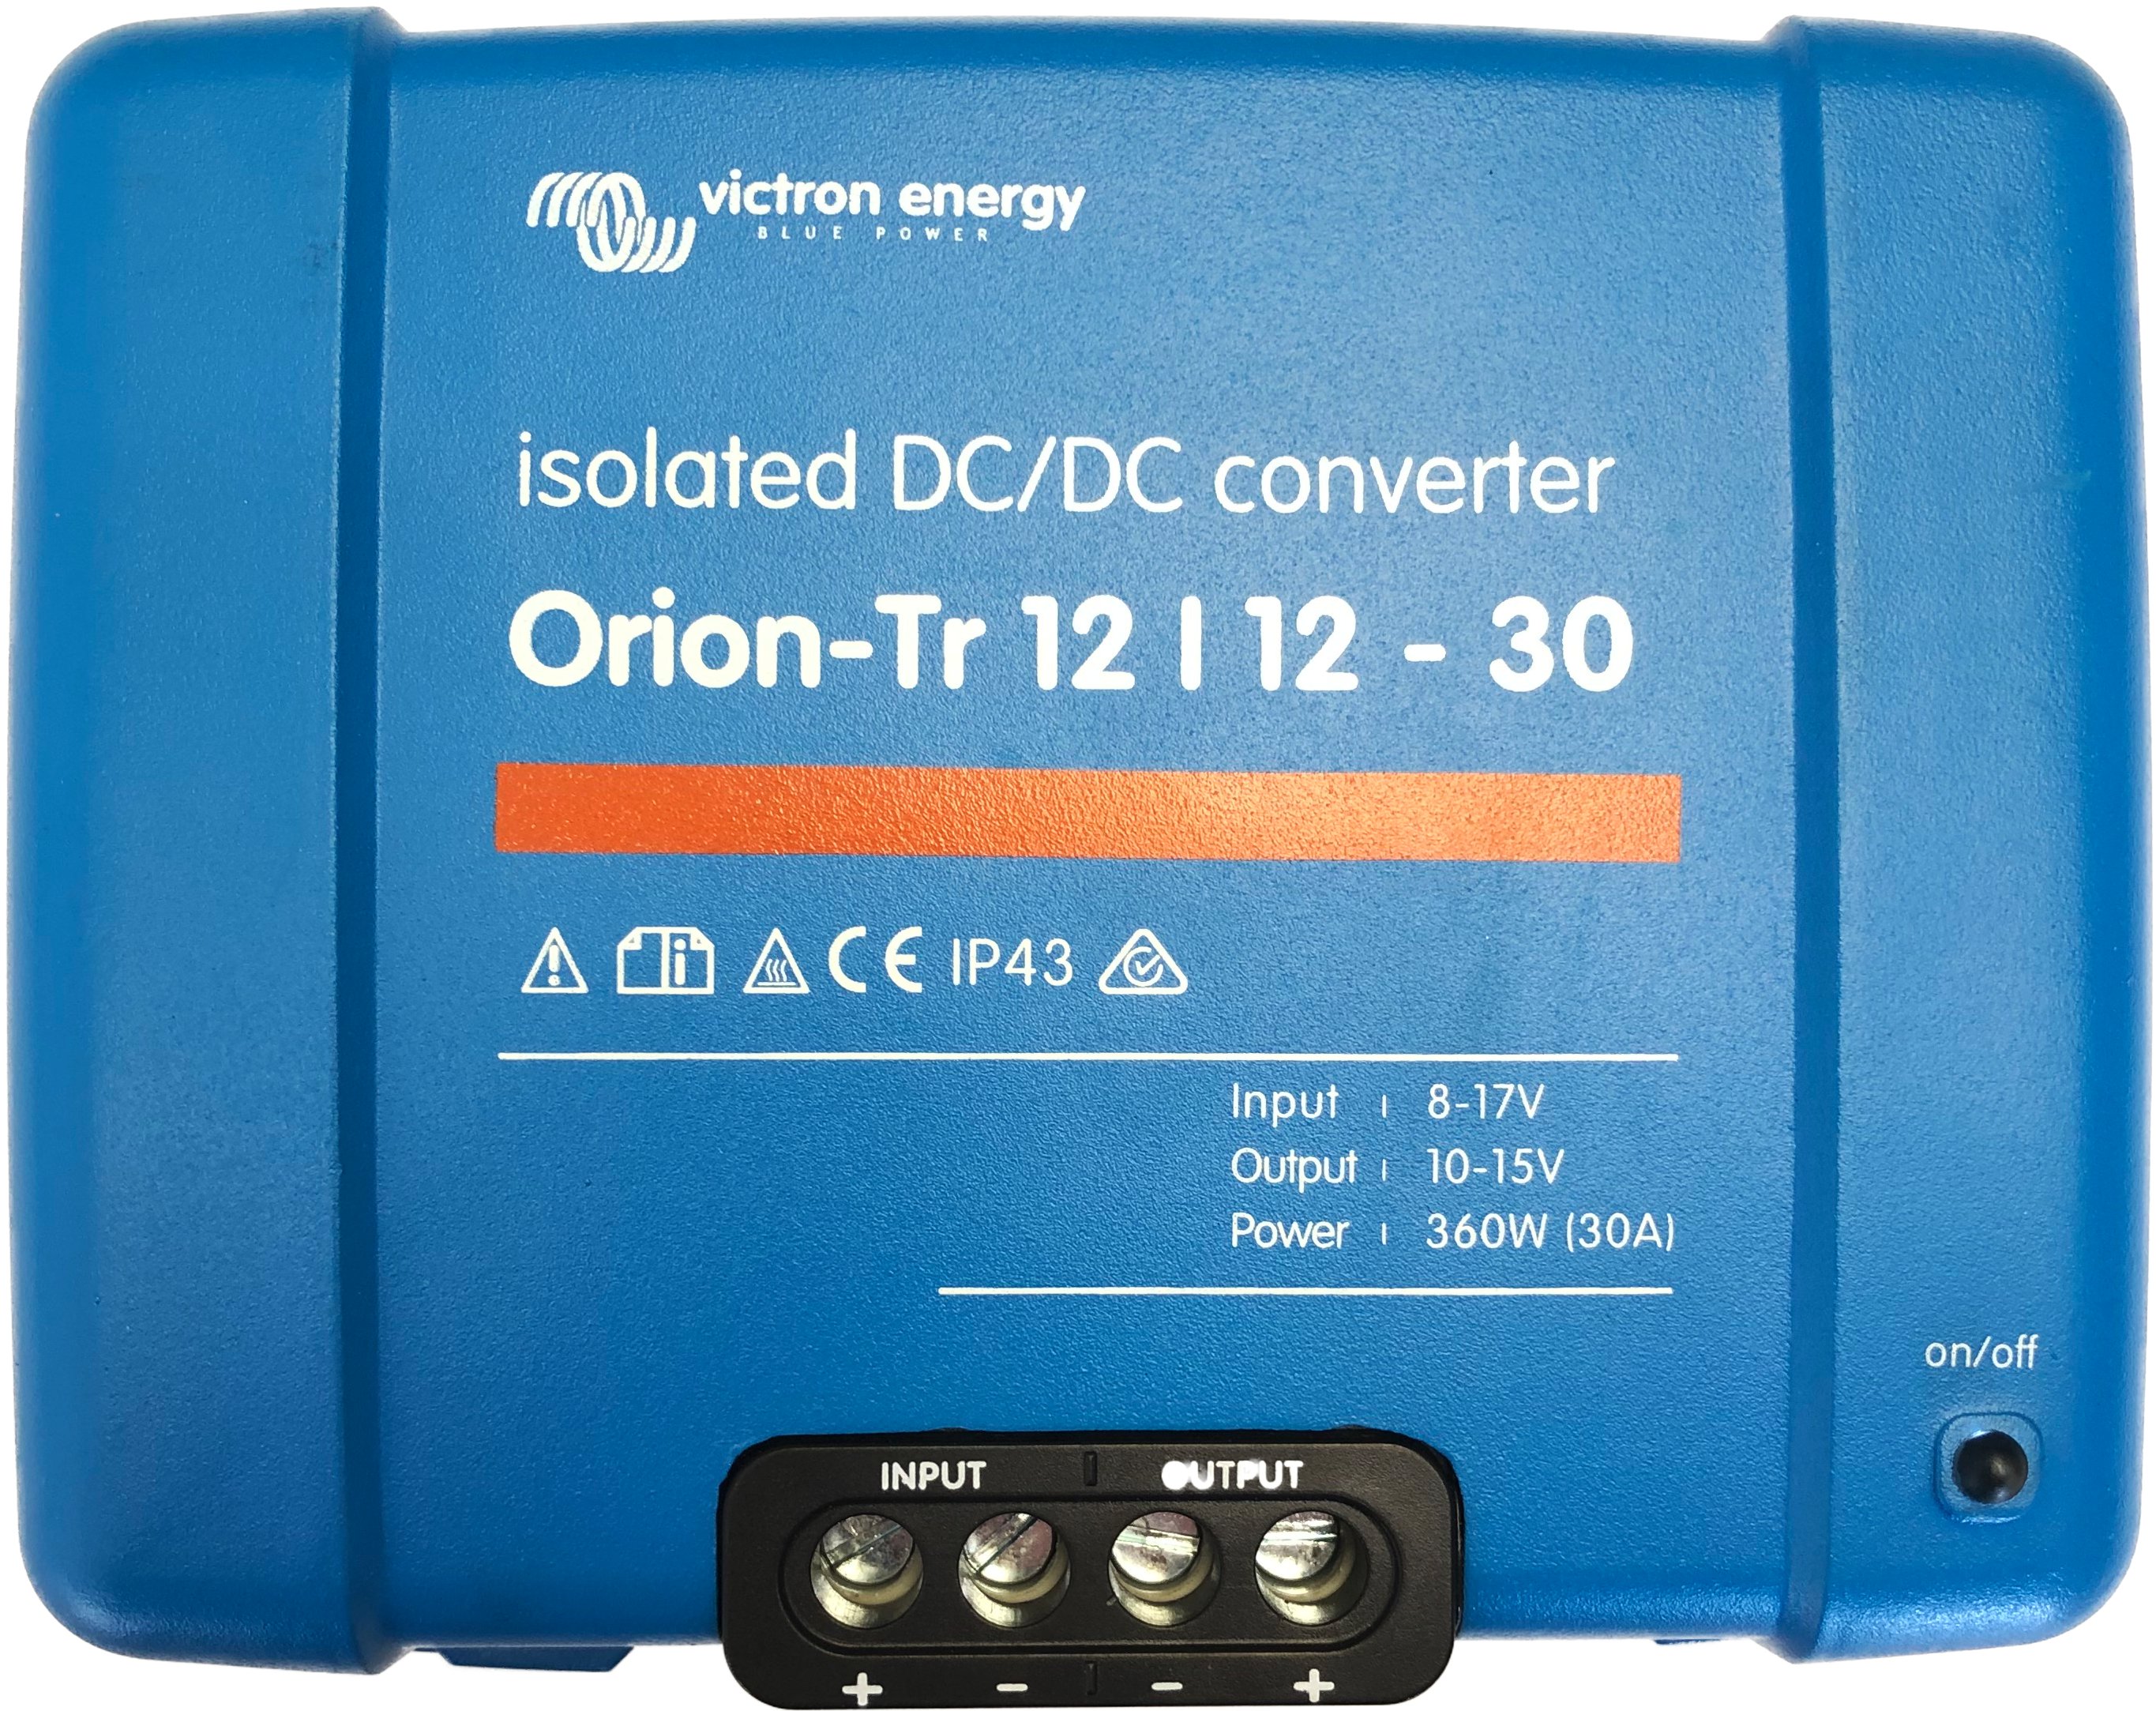 How does an isolated DC-DC converter differ from a non isolated DC-DC converter?